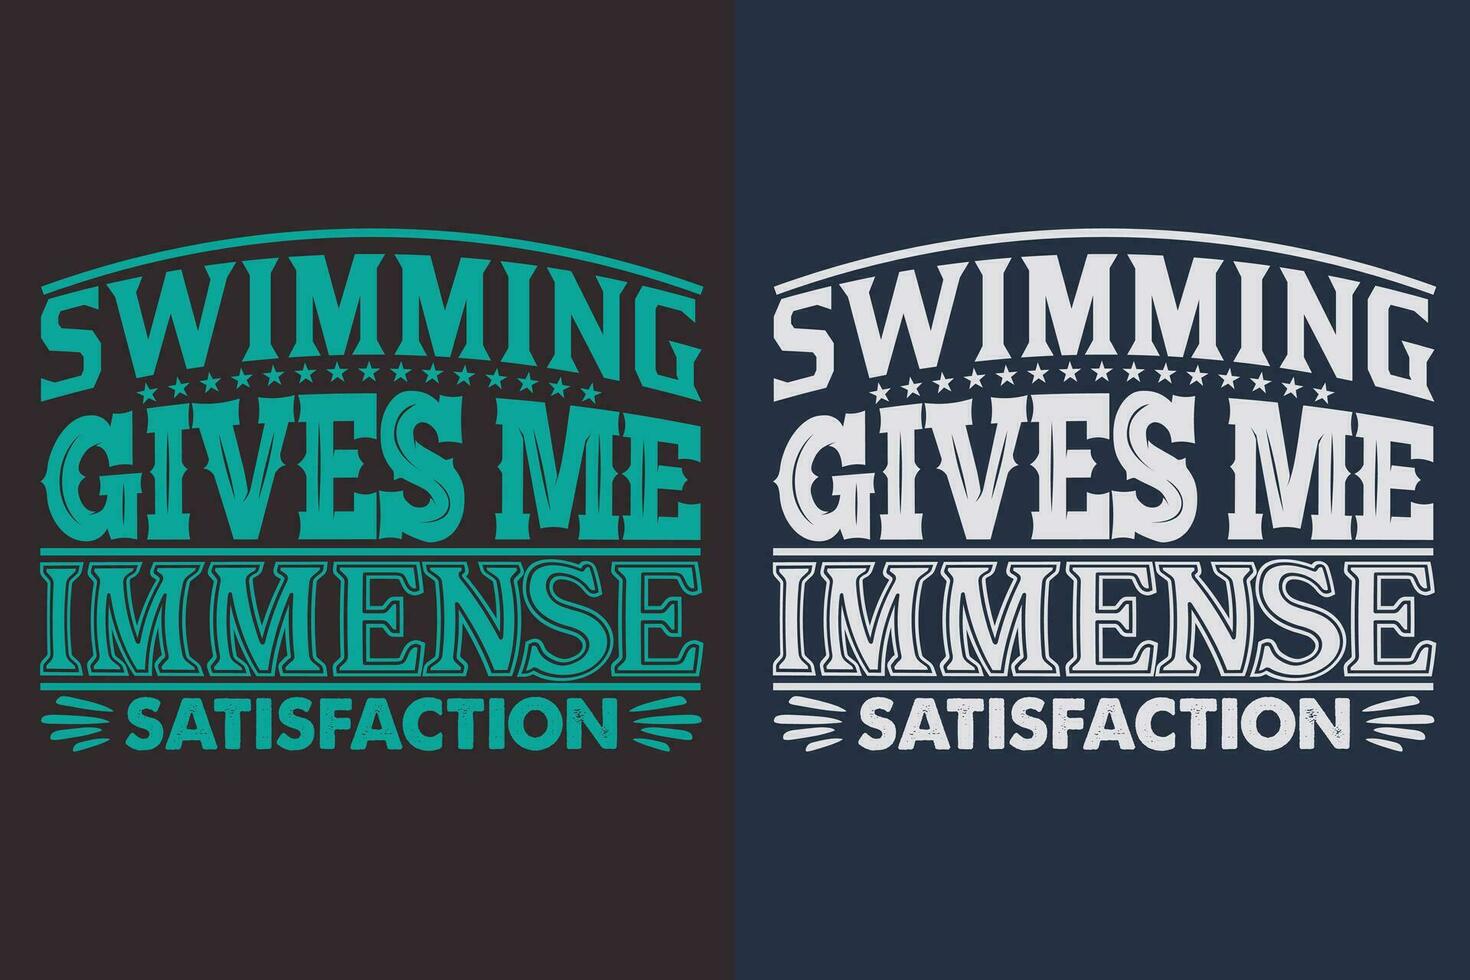 Swimming Gives Me Immense Satisfaction, Swimming Shirt, Swim Gift, Swimming T-Shirt, Swimming Gift, Swim Team Shirts, Swim Mom Shirt, Gift For Swimmer, Swimming Shirt for Women vector